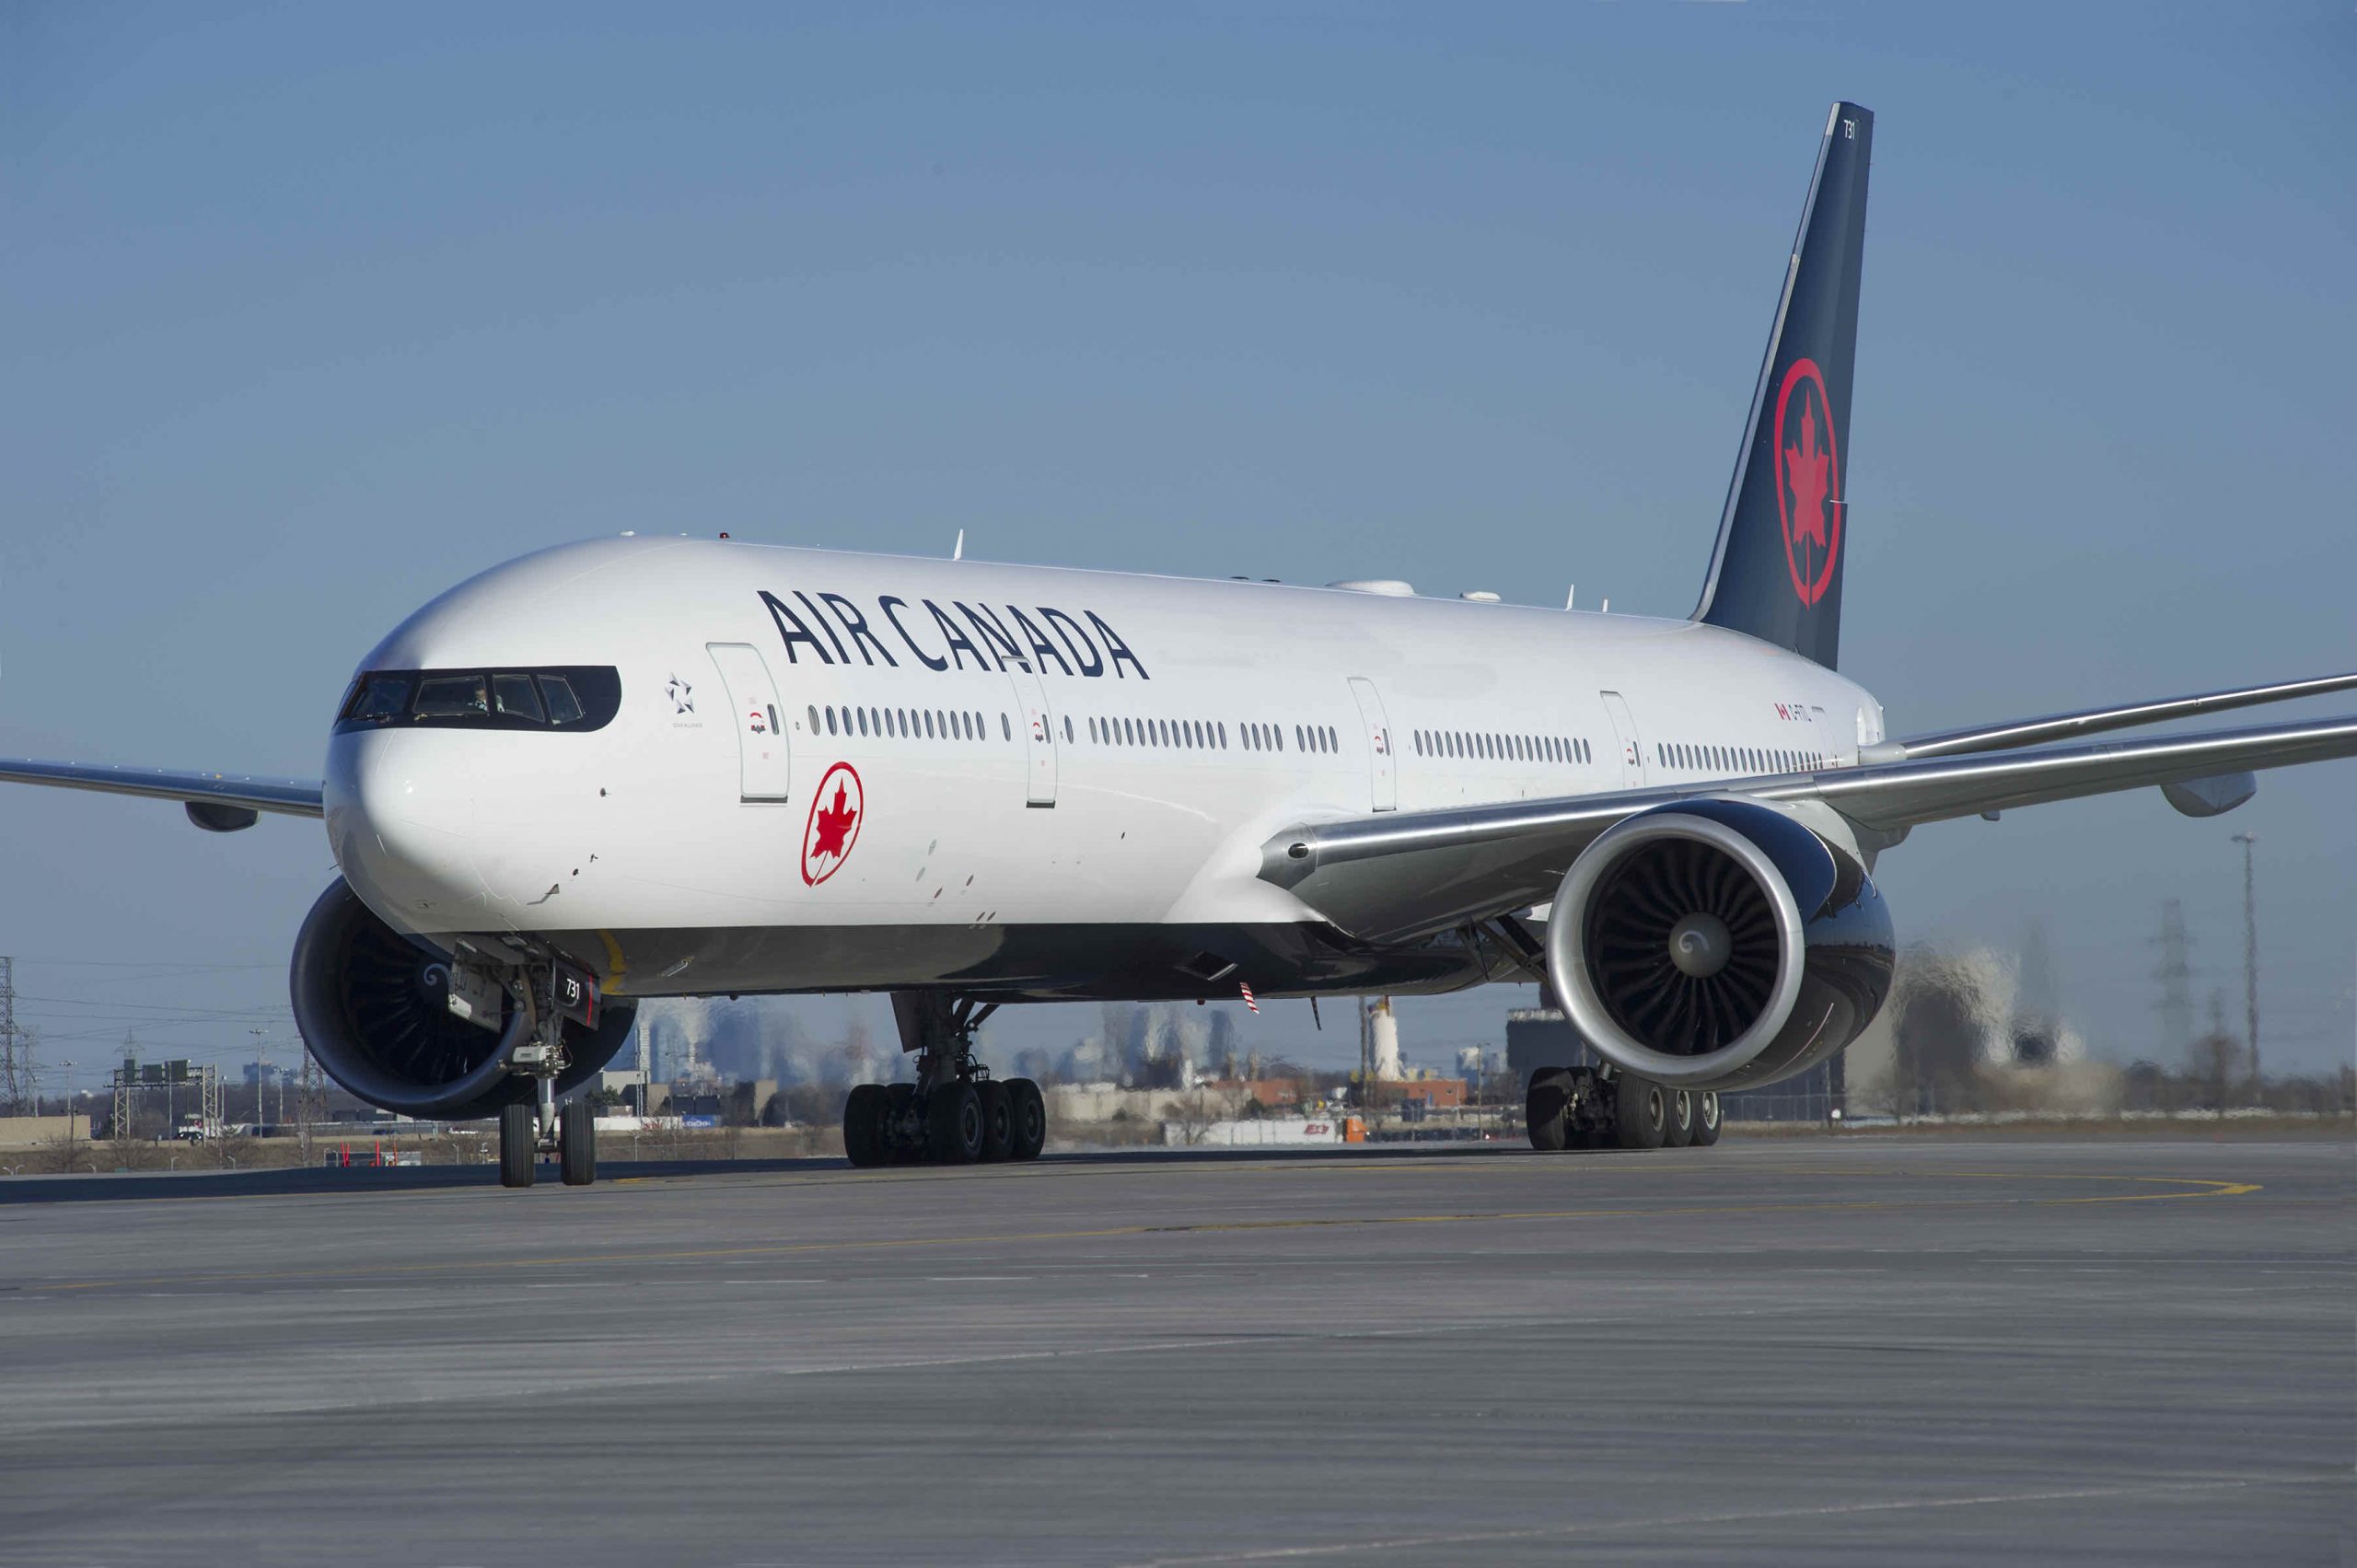 Air Canada to operate 100 all-cargo flights per week in Q4